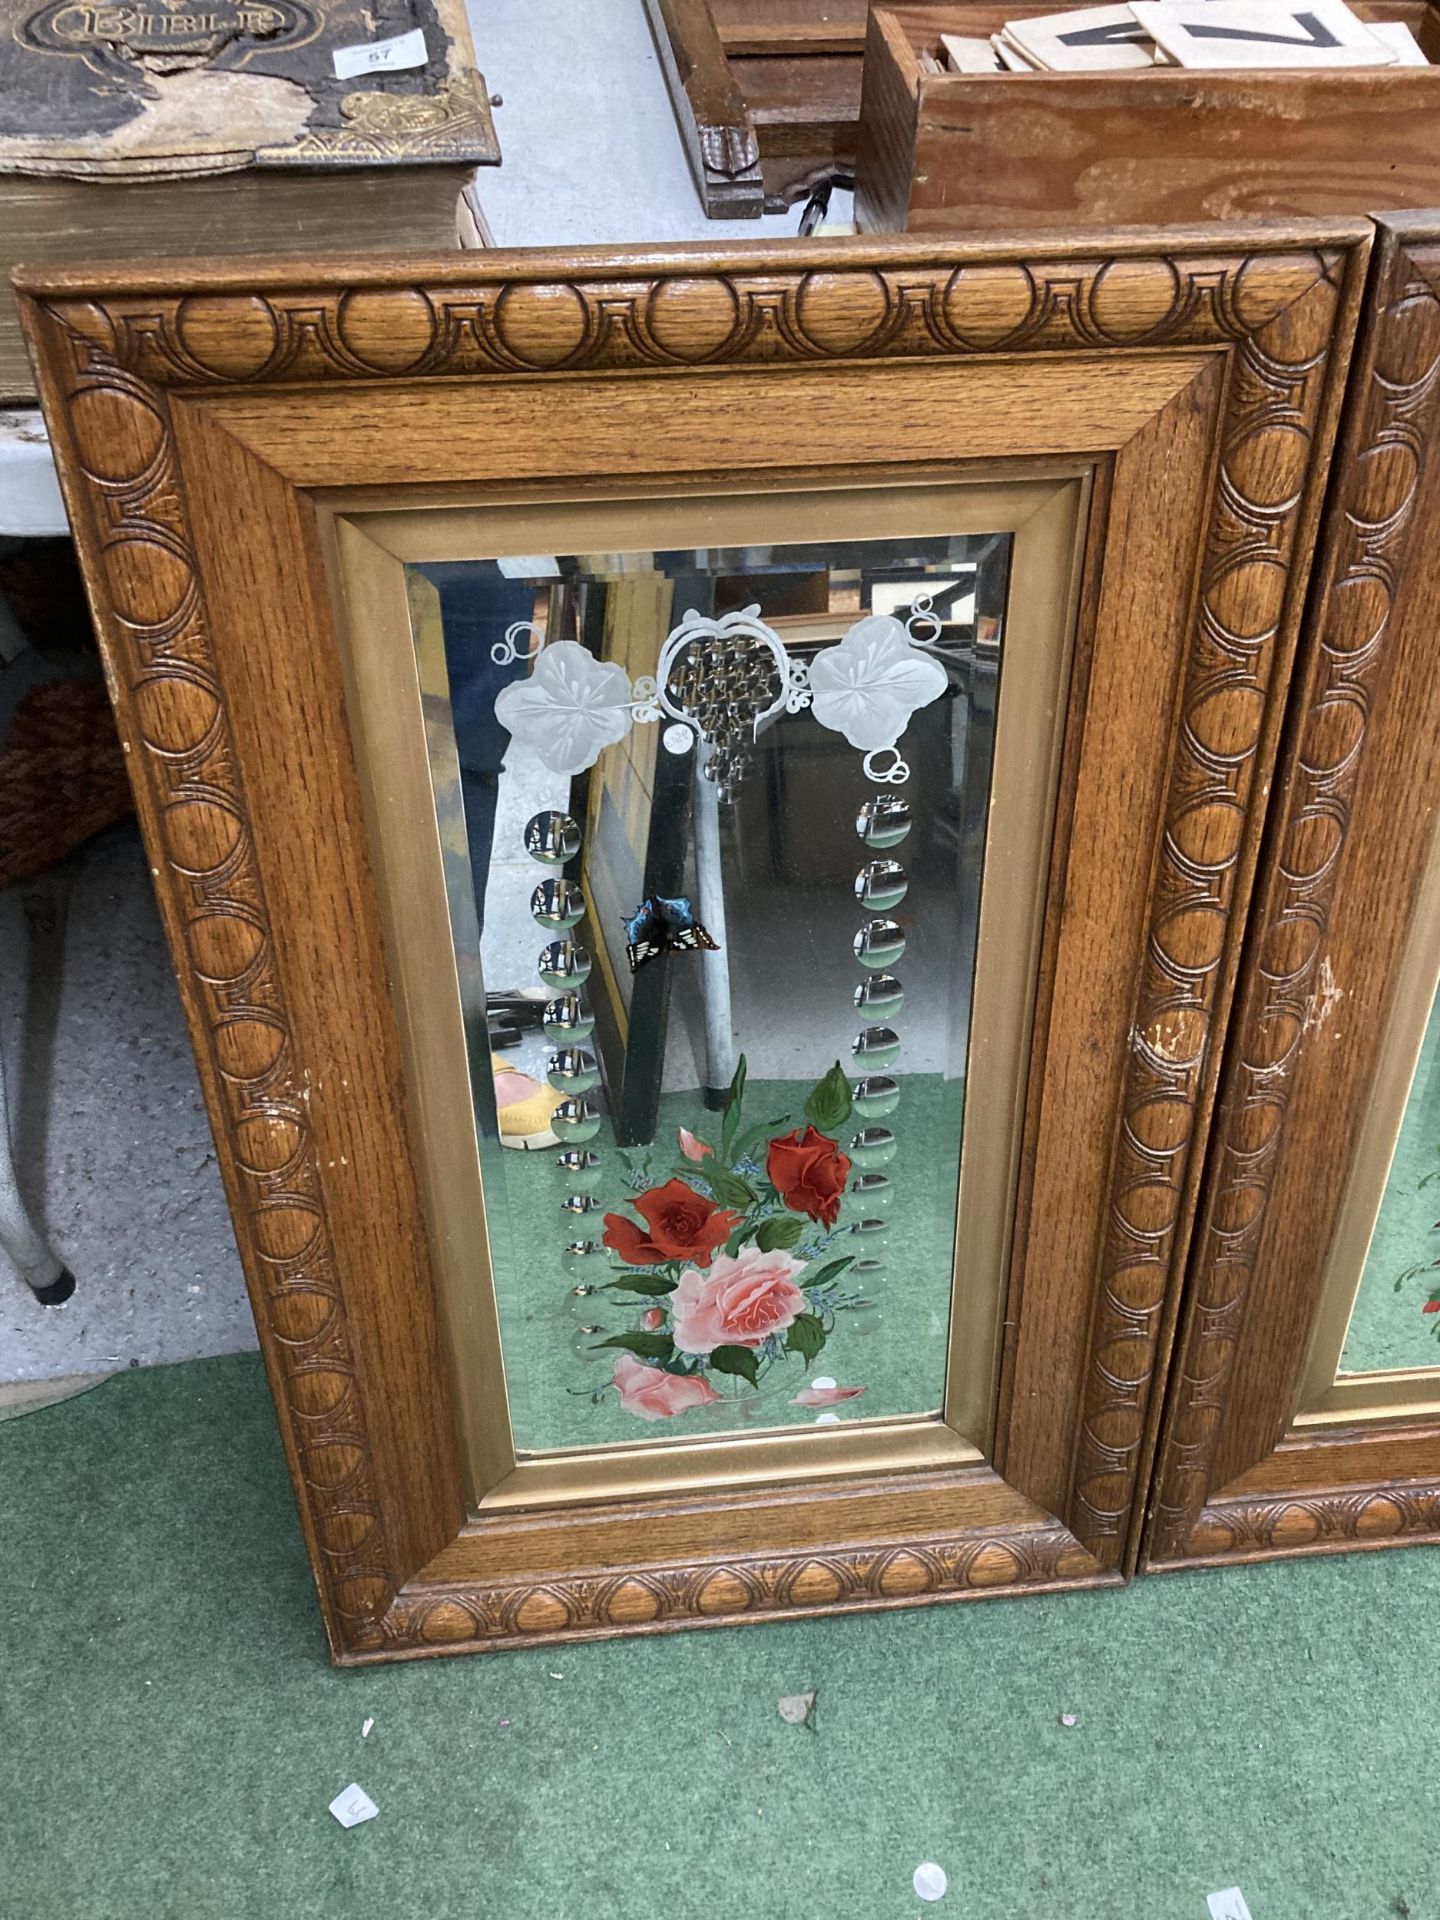 A PAIR OF OAK FRAMED MIRRORS WITH PAINTED FLORAL AND ETCHED DESIGN - Image 2 of 3